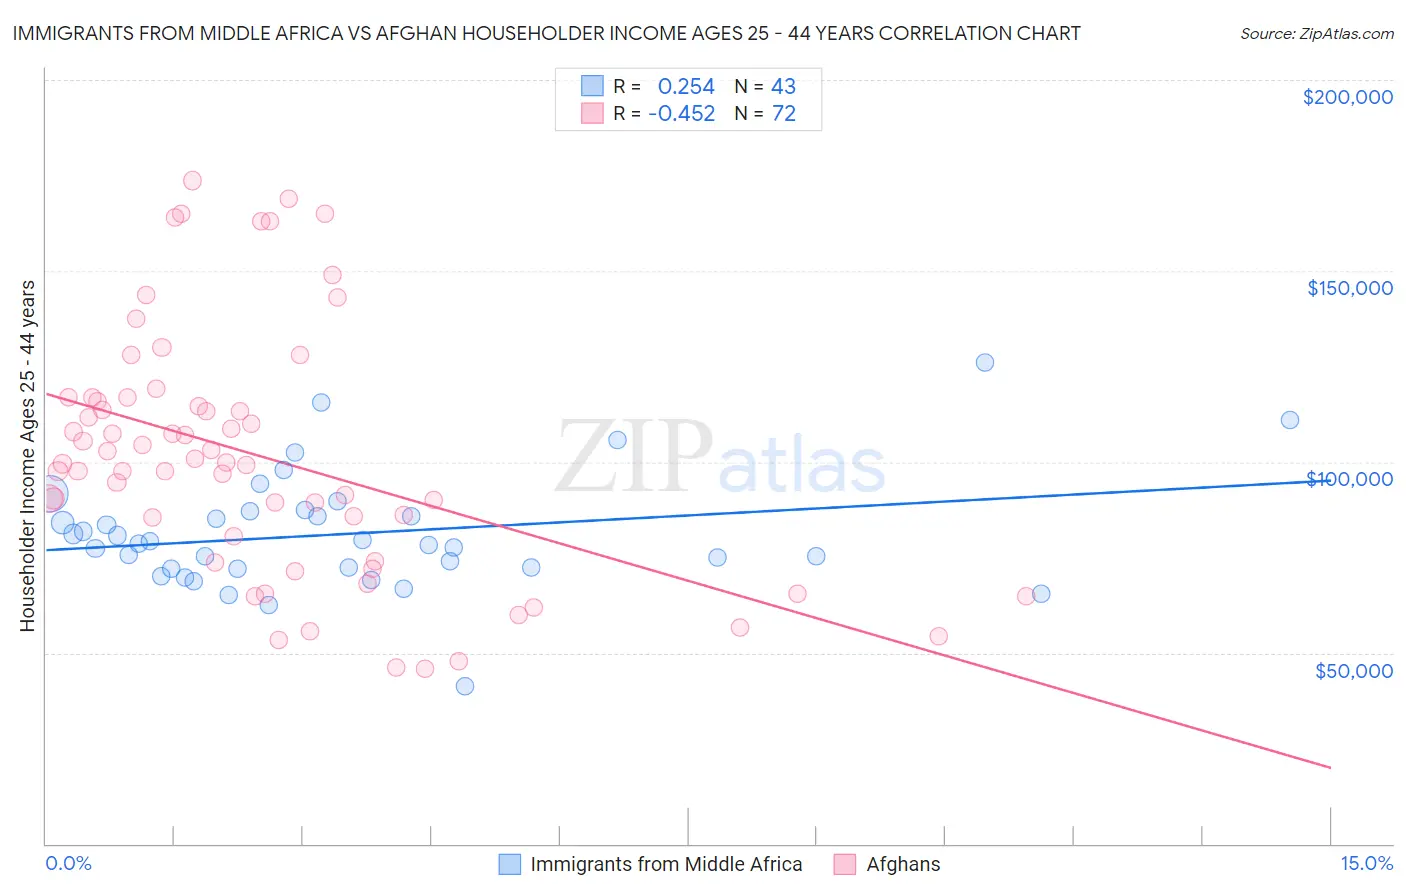 Immigrants from Middle Africa vs Afghan Householder Income Ages 25 - 44 years